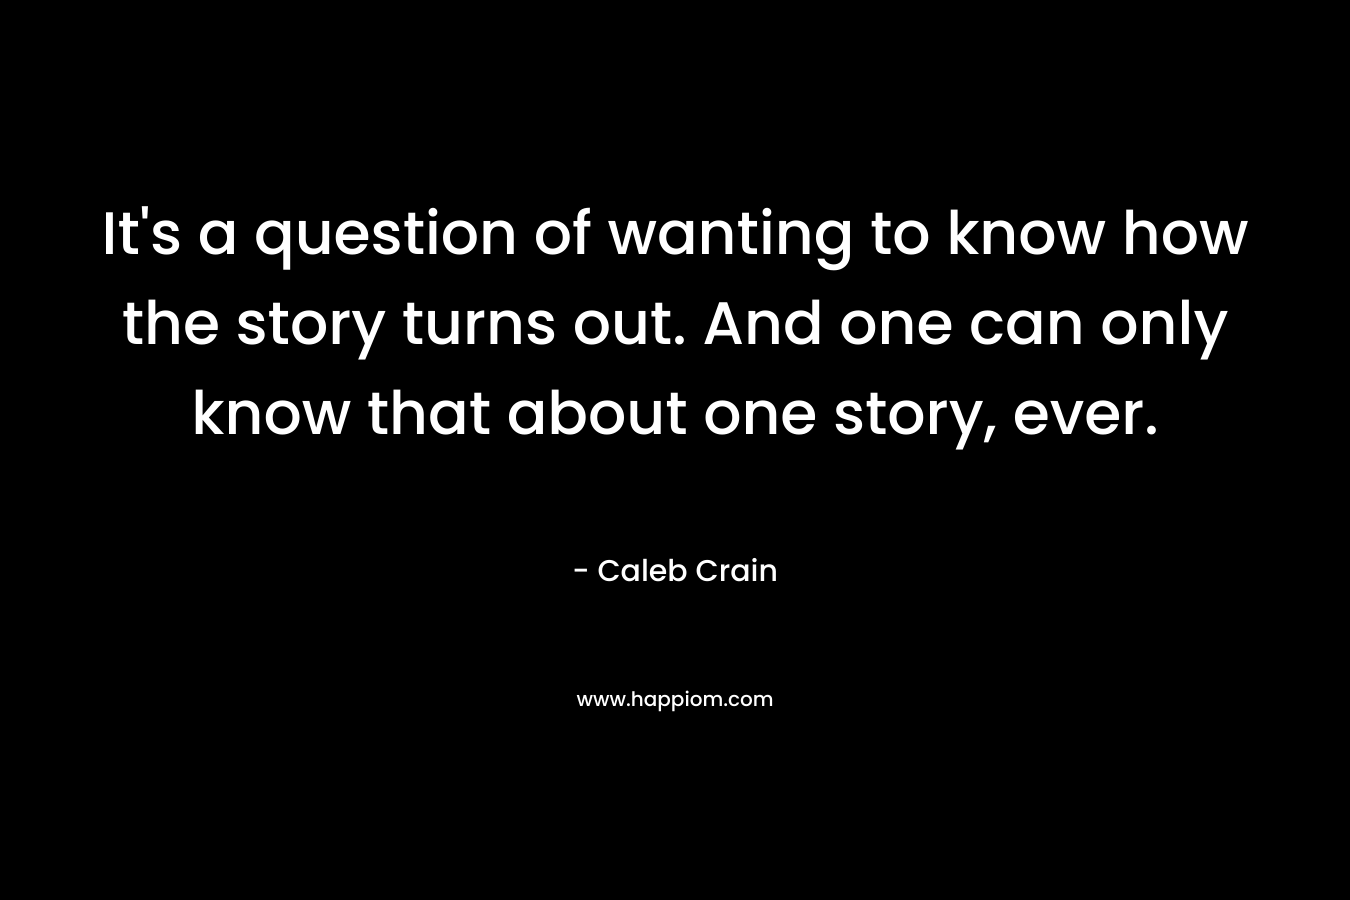 It's a question of wanting to know how the story turns out. And one can only know that about one story, ever.